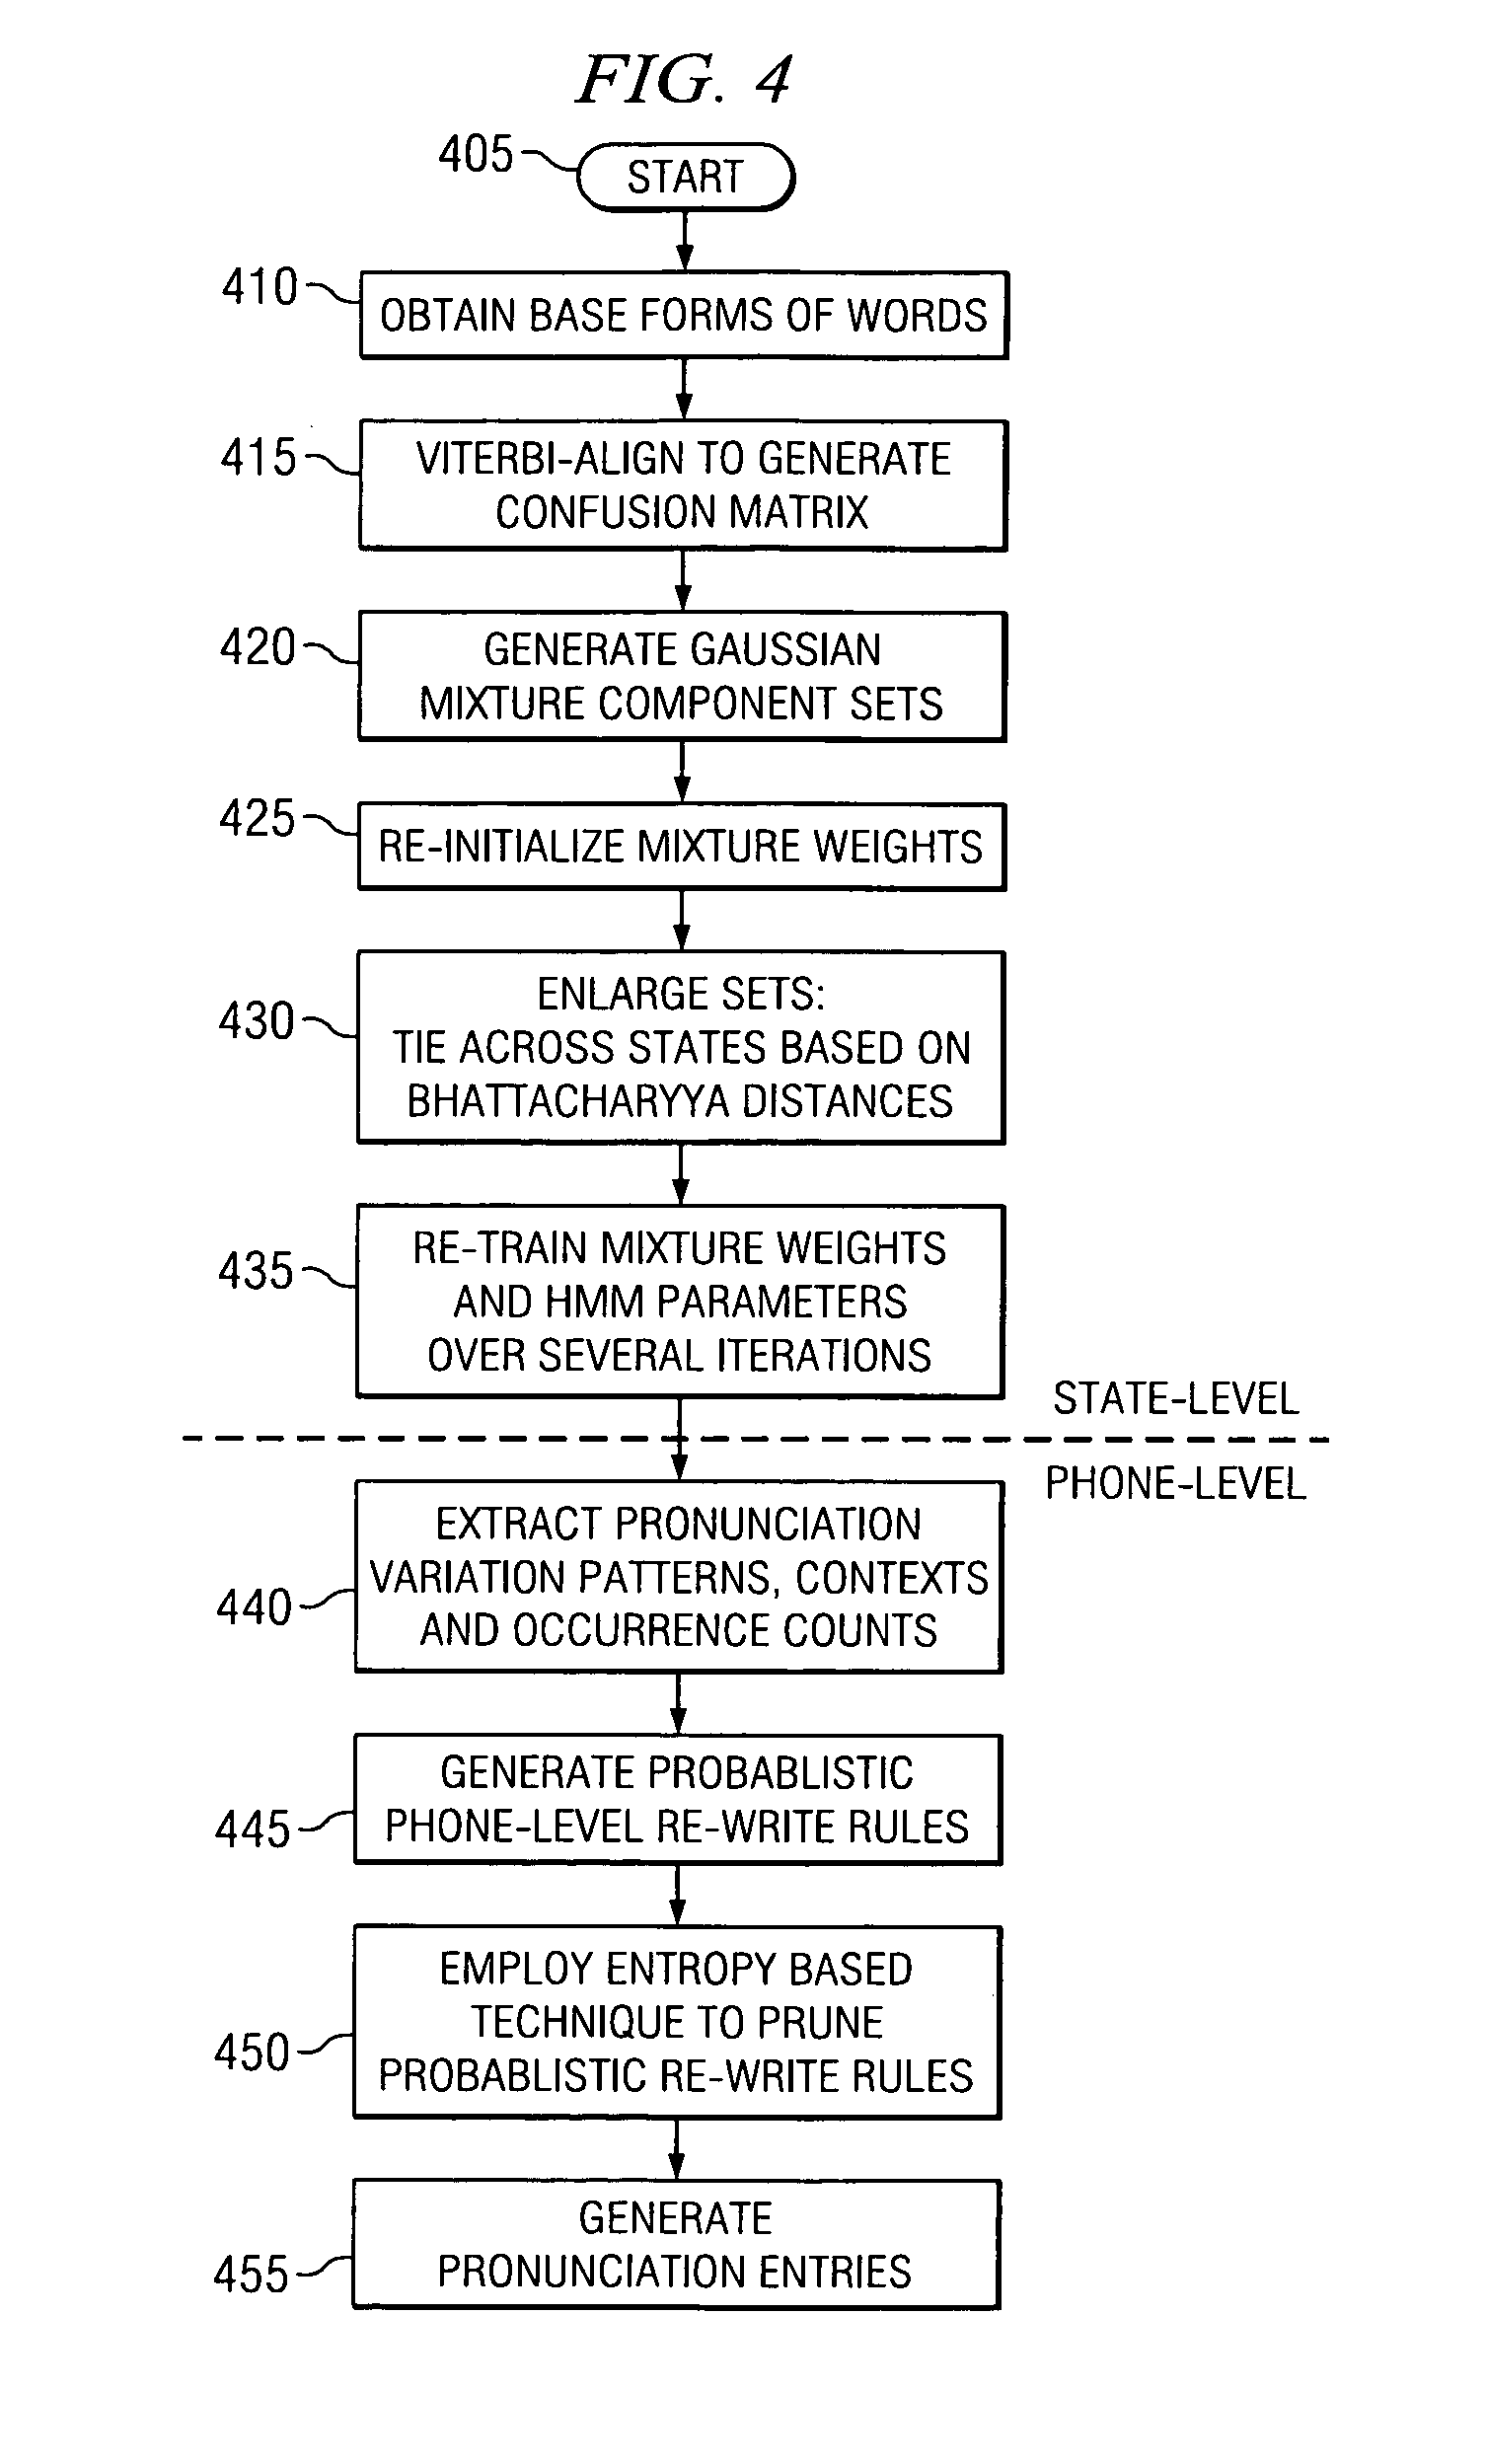 System and method for combined state- and phone-level and multi-stage phone-level pronunciation adaptation for speaker-independent name dialing